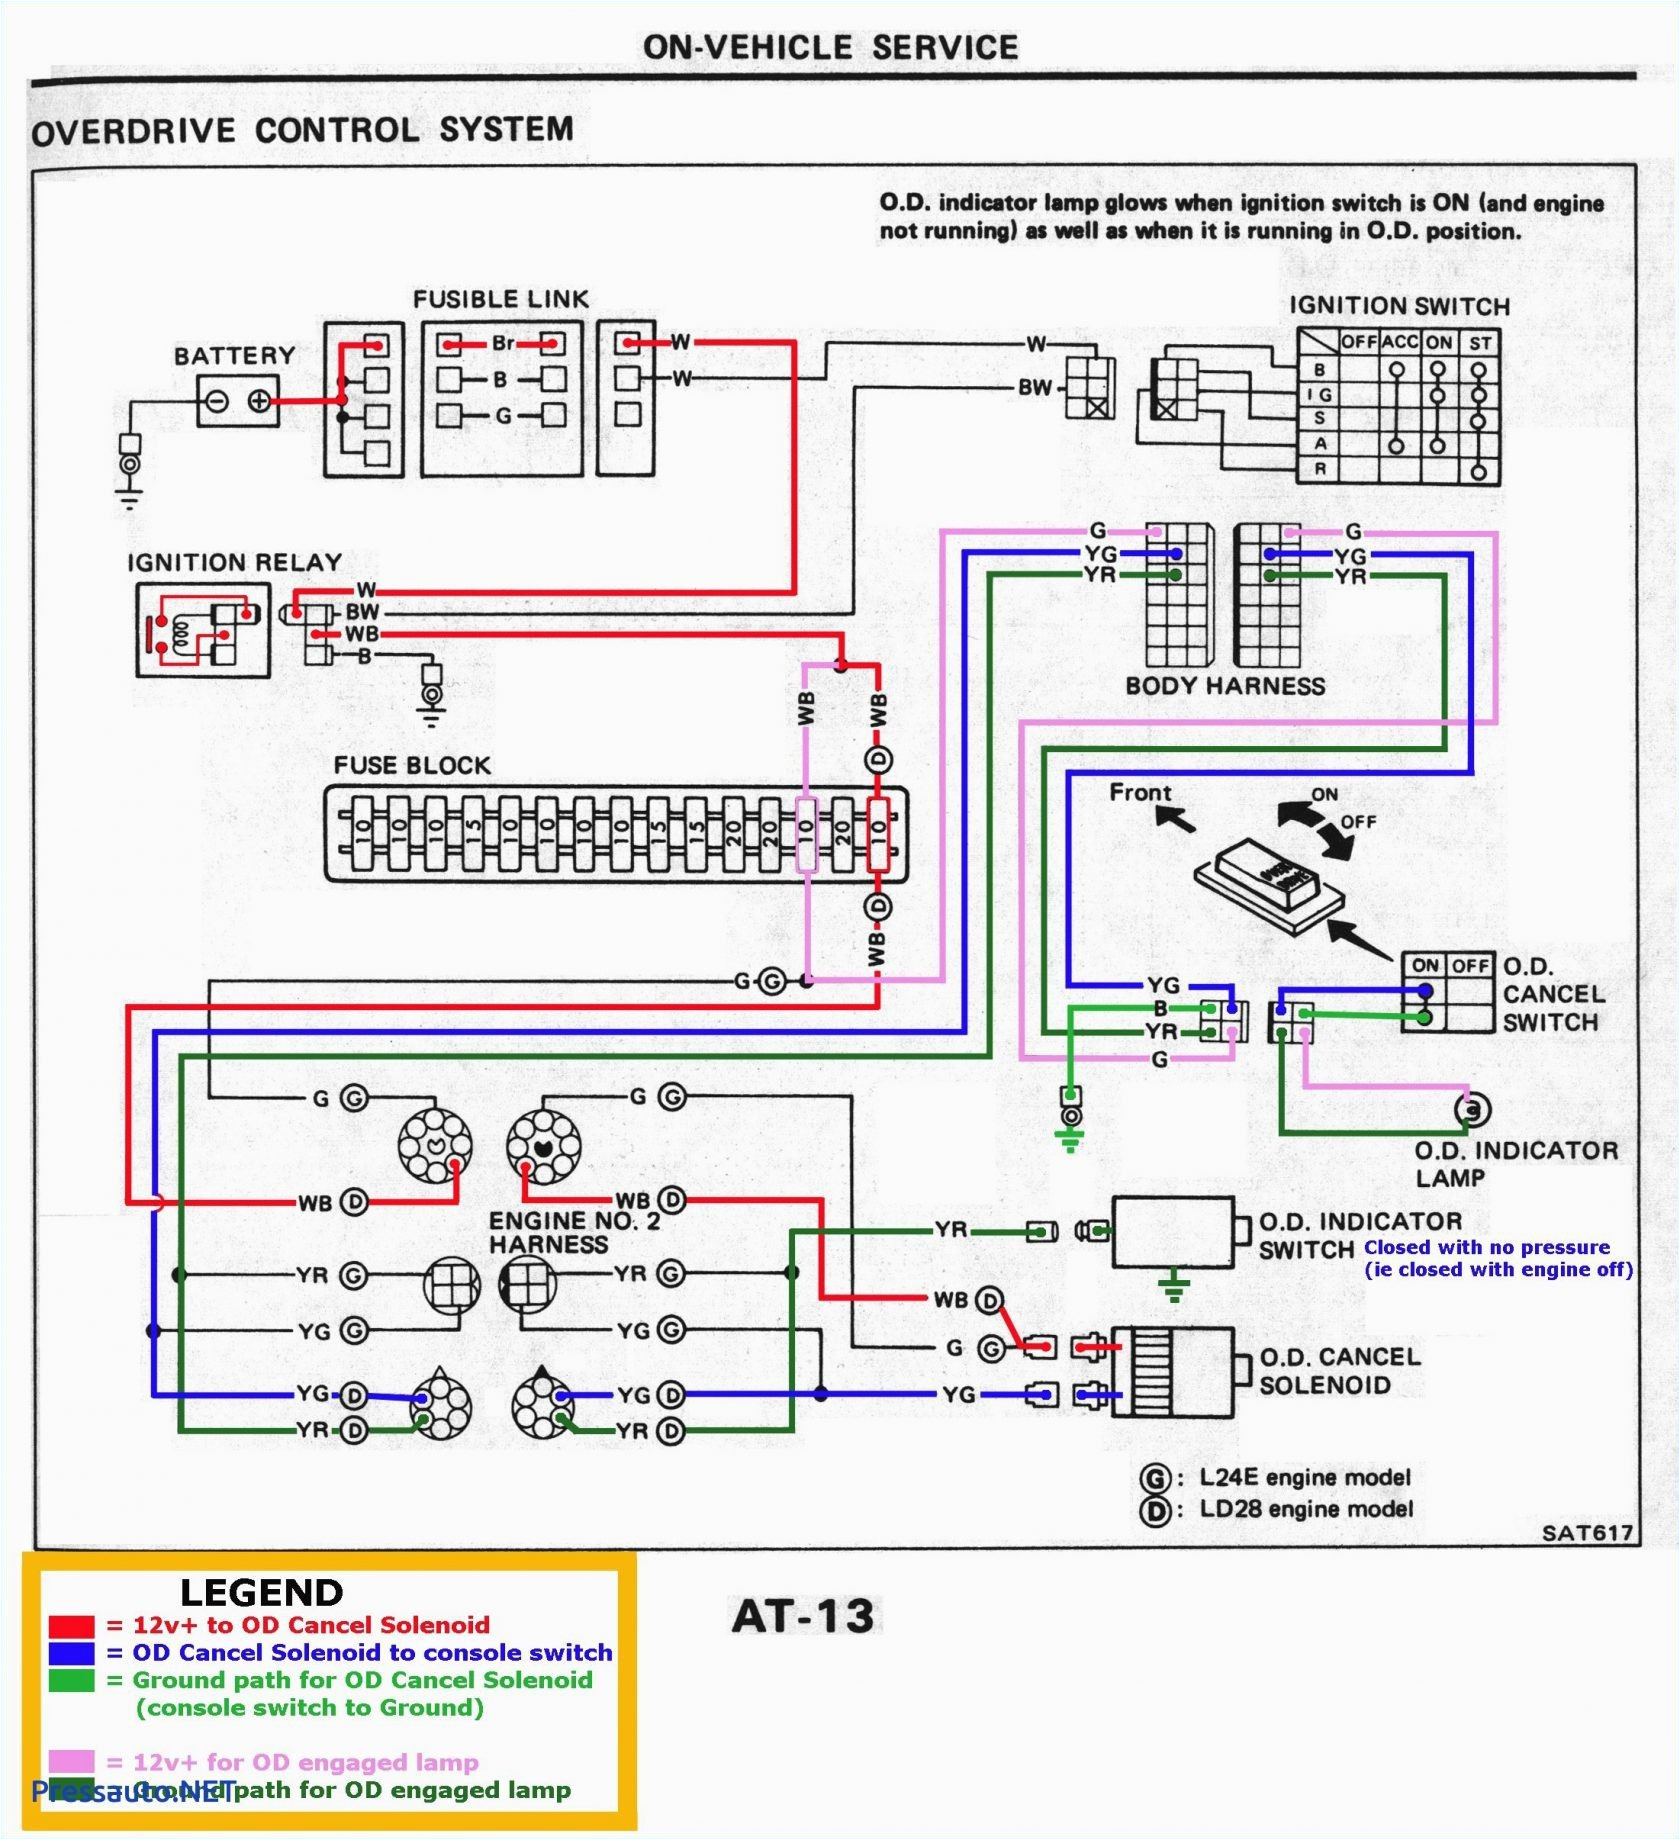 68 camaro ignition wiring harness diagram wiring diagram page redline chevy 7 pin wiring harness